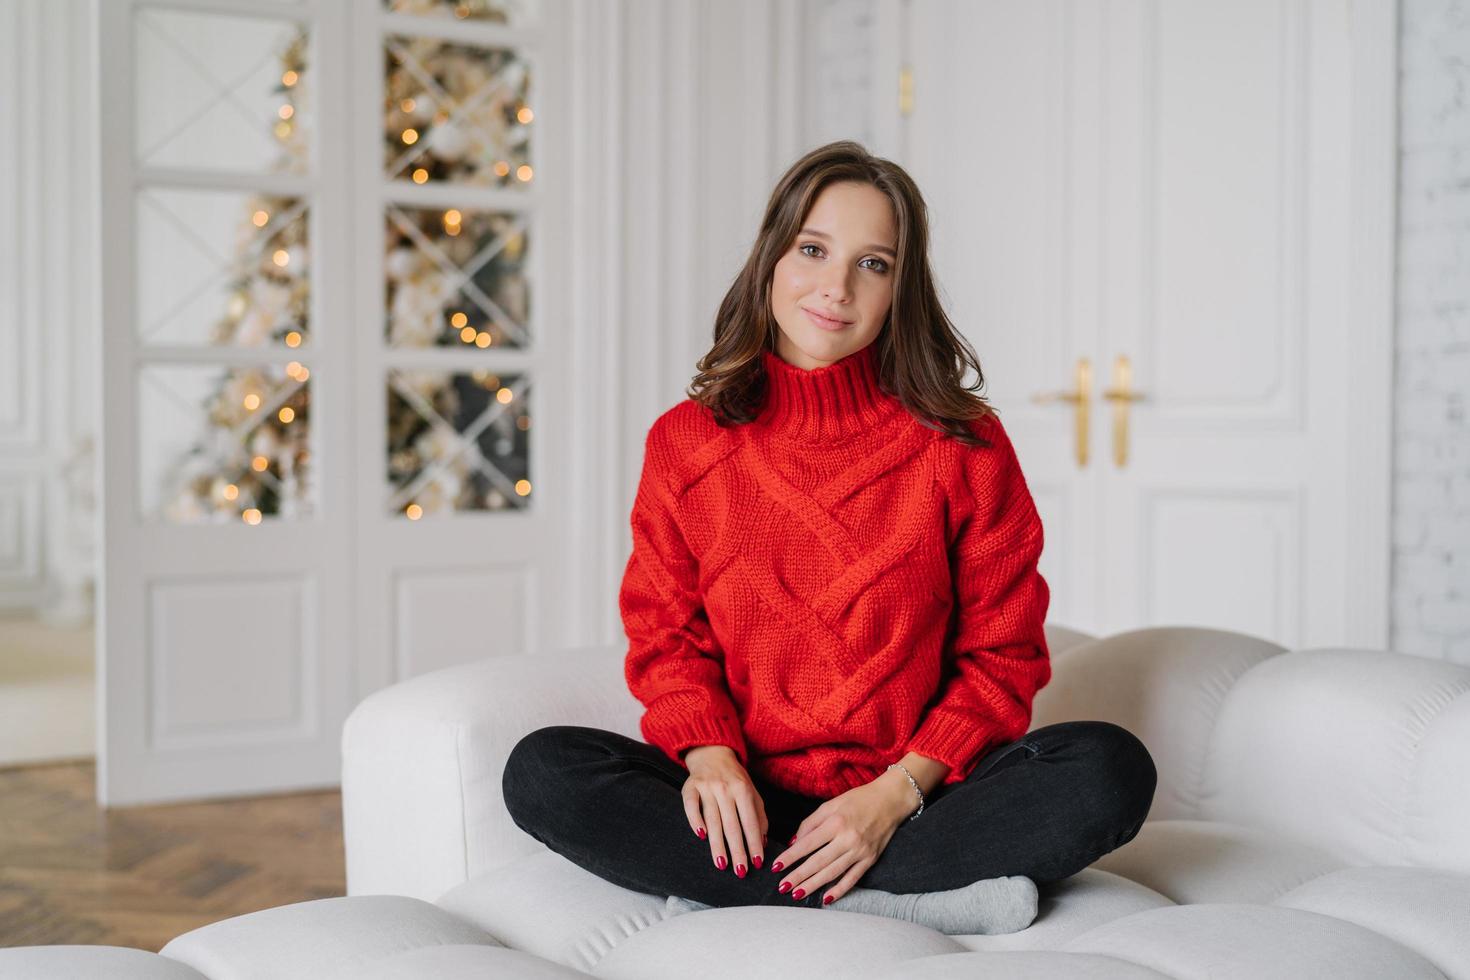 Photo of calm carefree girl wears warm doemstic clothes, poses on white couch, looks directly at camera, spends winter weekend at home, anticipates New Year, decorated fir tree. Holidays concept